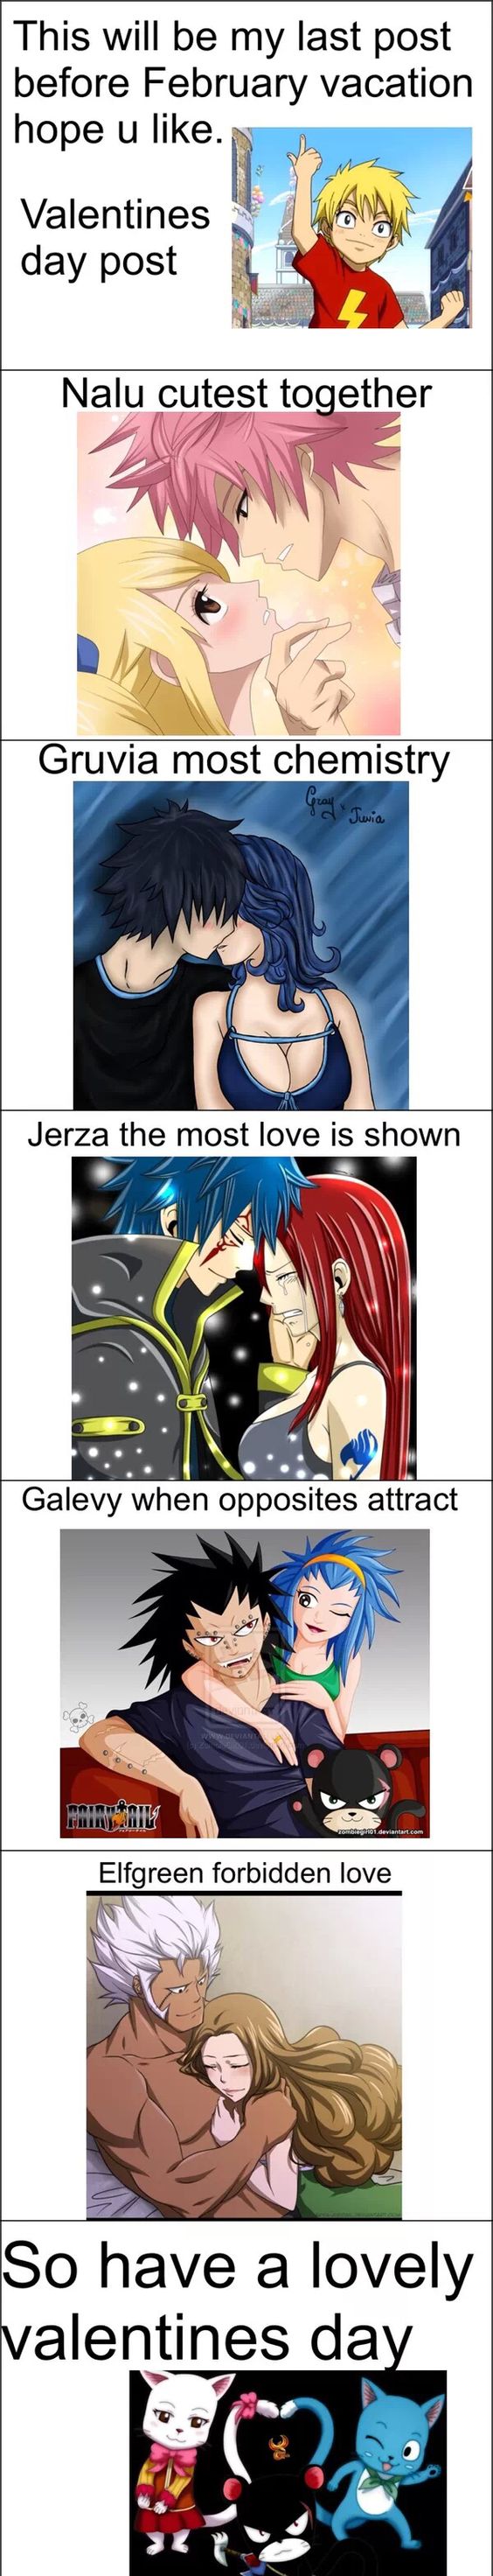 Fairy tail couples!!!!! Also this isn't my last post